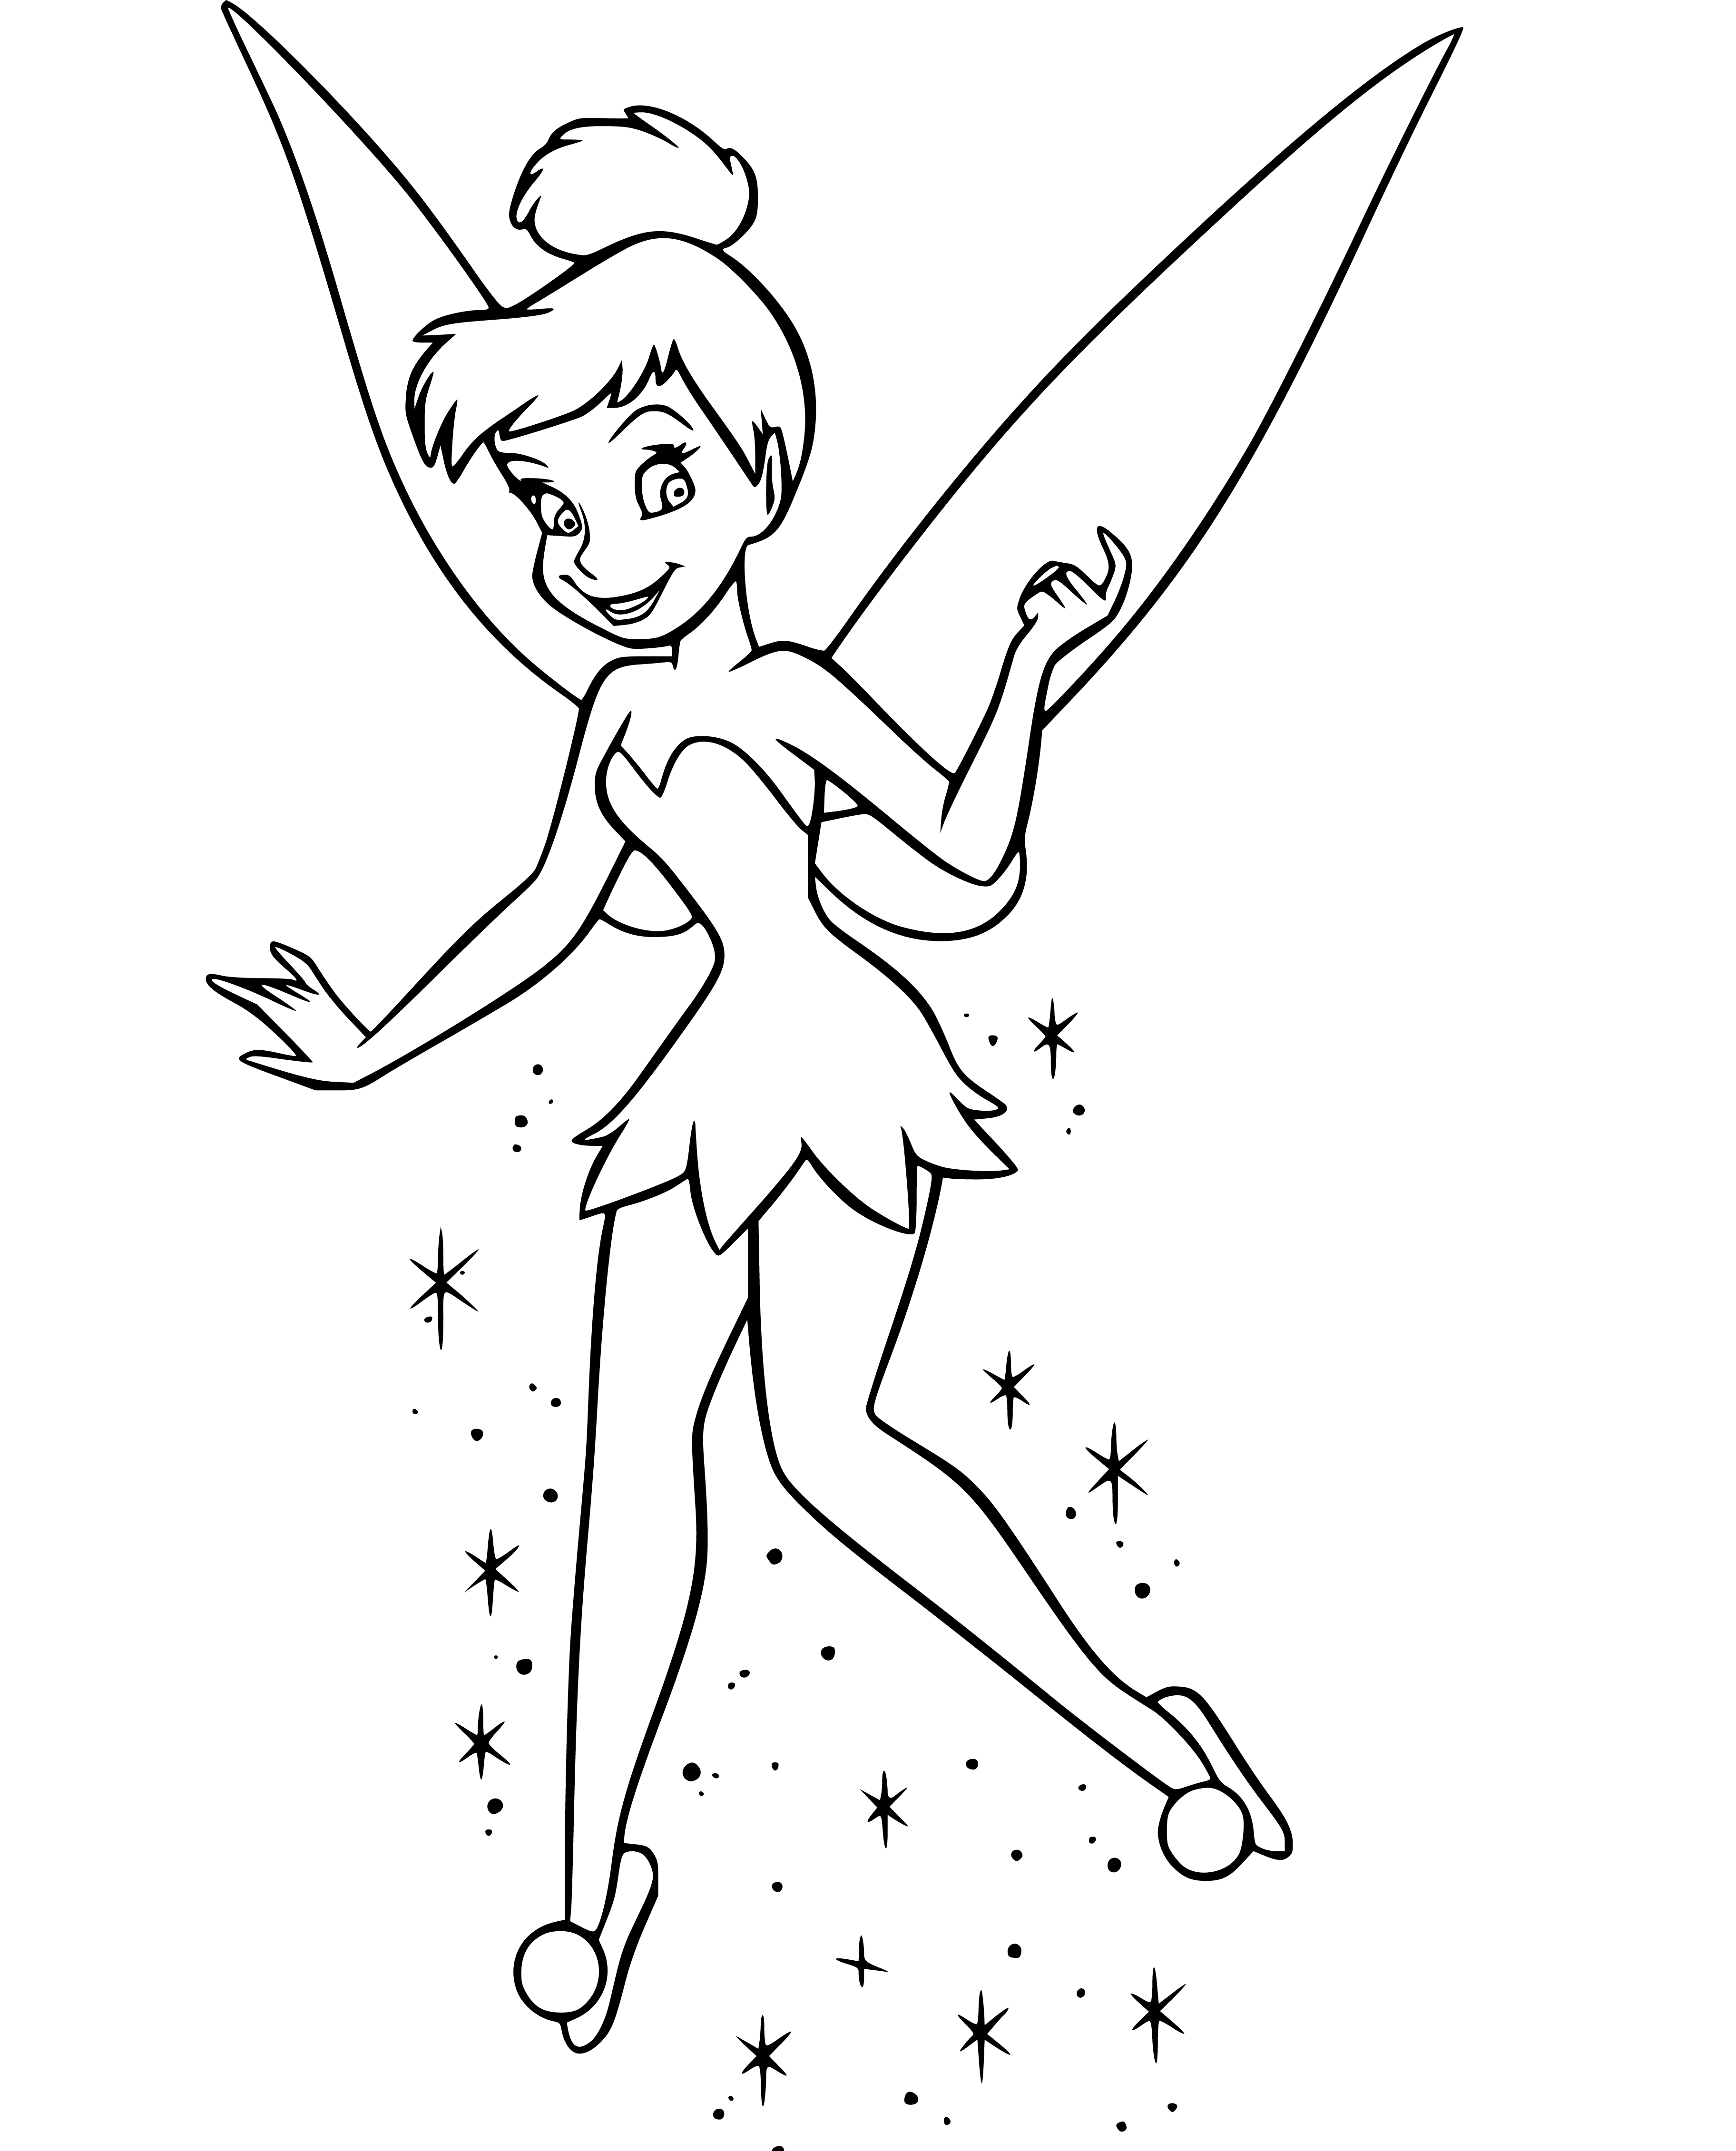 Tinker Bell and Stars Coloring sheet - SheetalColor.com